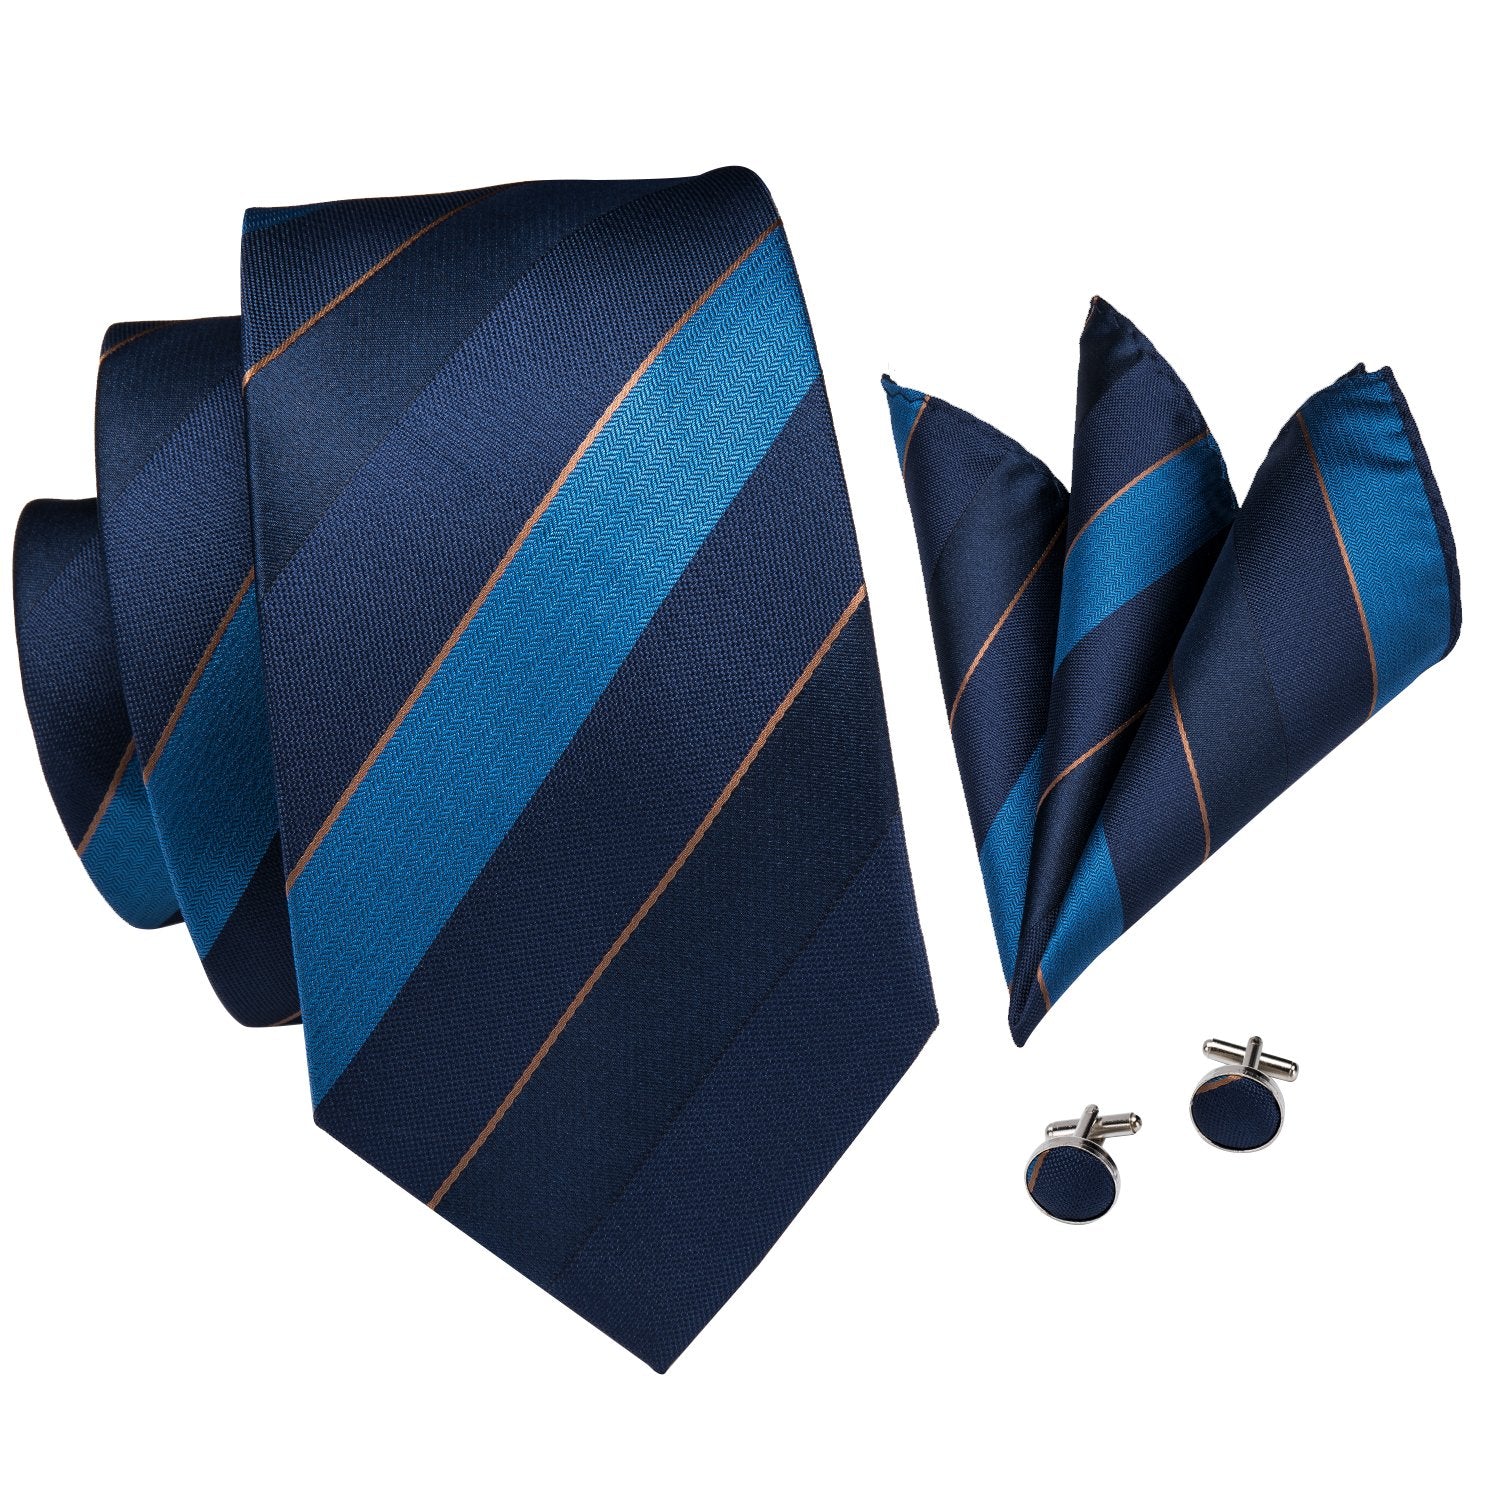 High Quality & Affordable Men's Tie, 100% Silk Tie and Discount Cheap Necktie,Free shipping. Men's fashion tie set. Best selling. More popular ties.